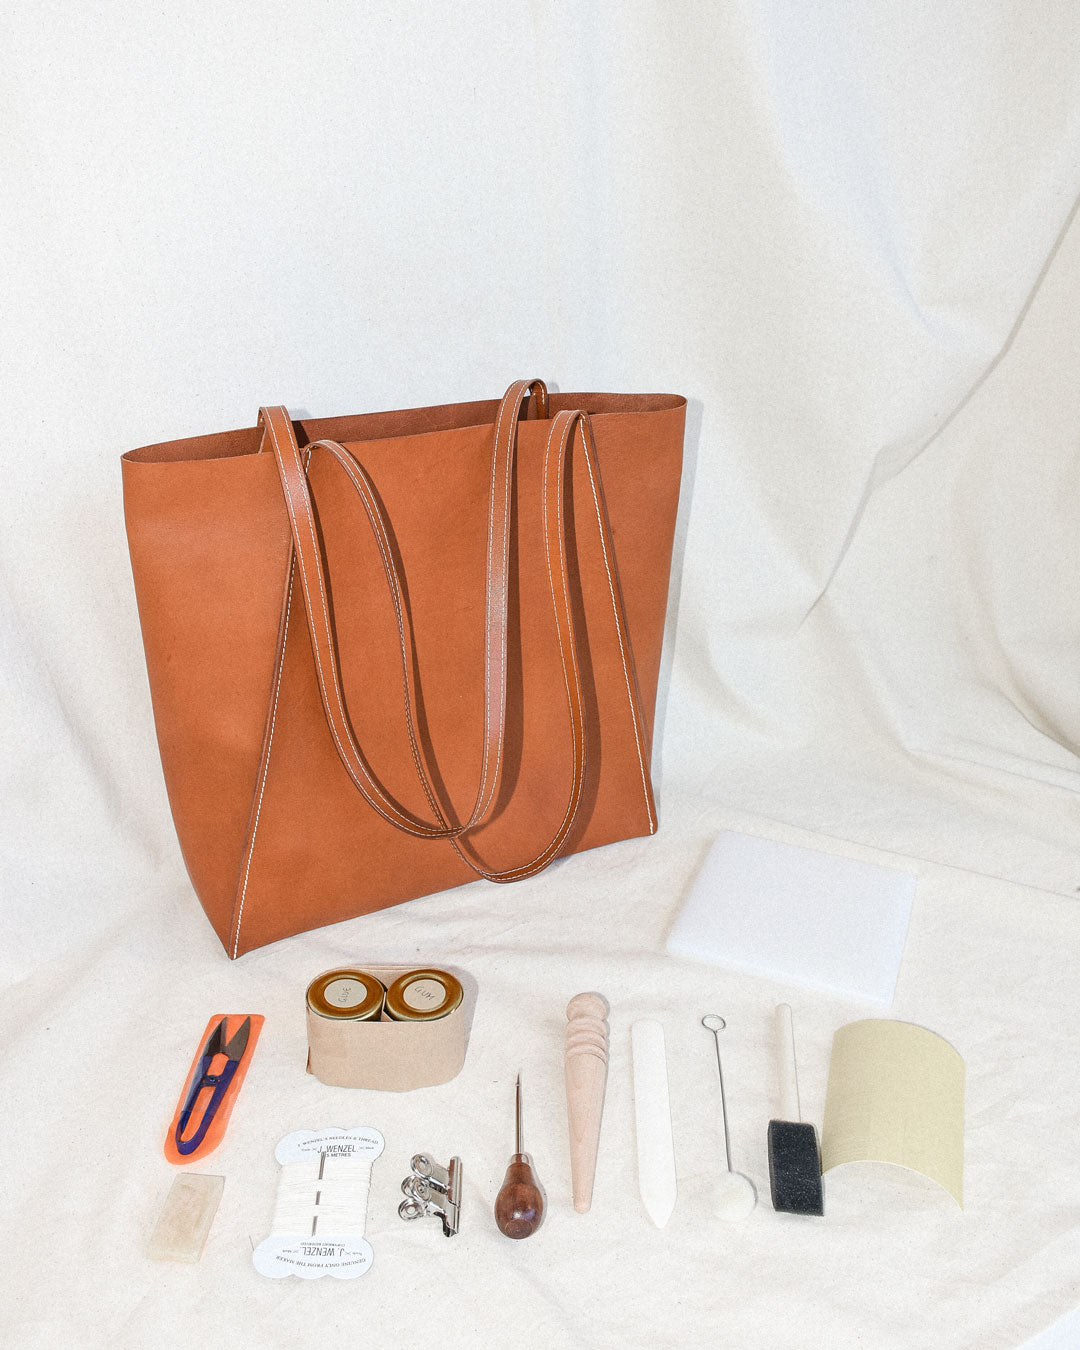 A tan leather tote bag is the focal point of the image. Various leather tools are in the foreground, such as an awl, snips, and a burnishing rod.